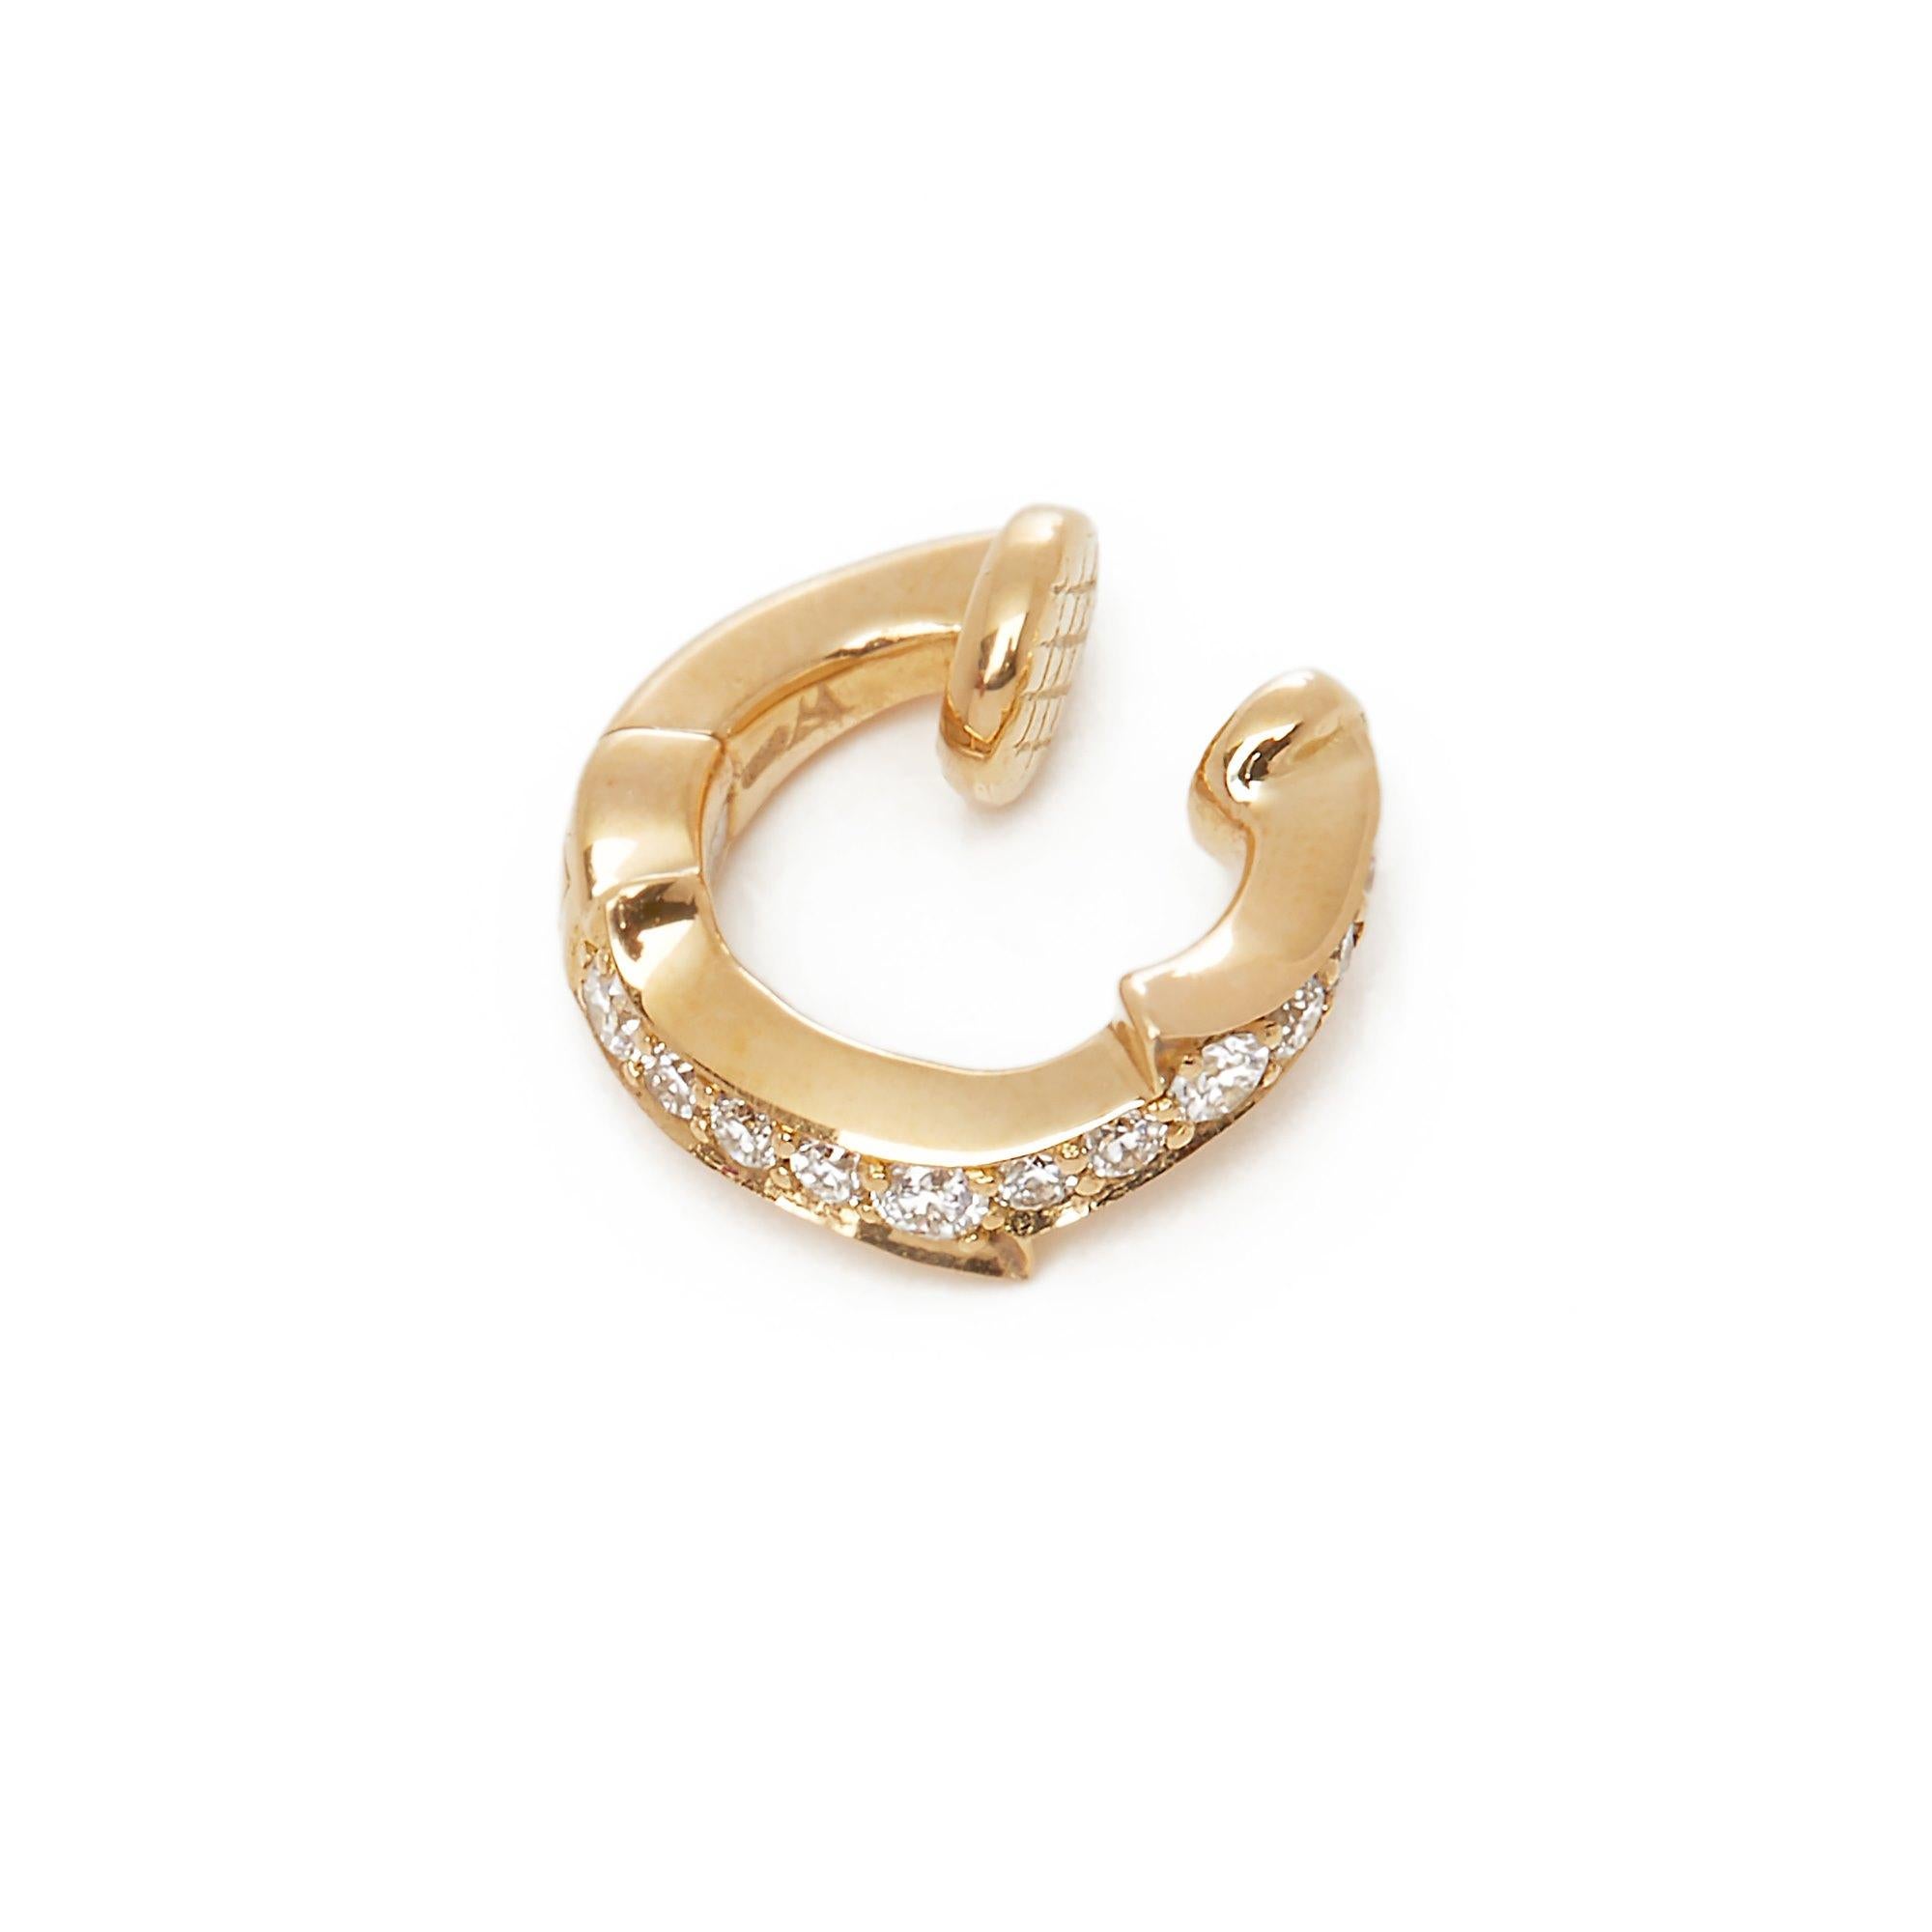 This Earclip by Stephen Webster is from his Thorn Collection and features Twelve Round Brilliant Diamonds Totalling 0.12cts. Set in 18k Yellow Gold. Complete with Xupes Presentation Box. Our Xupes reference is COMJ442 should you need to quote this.